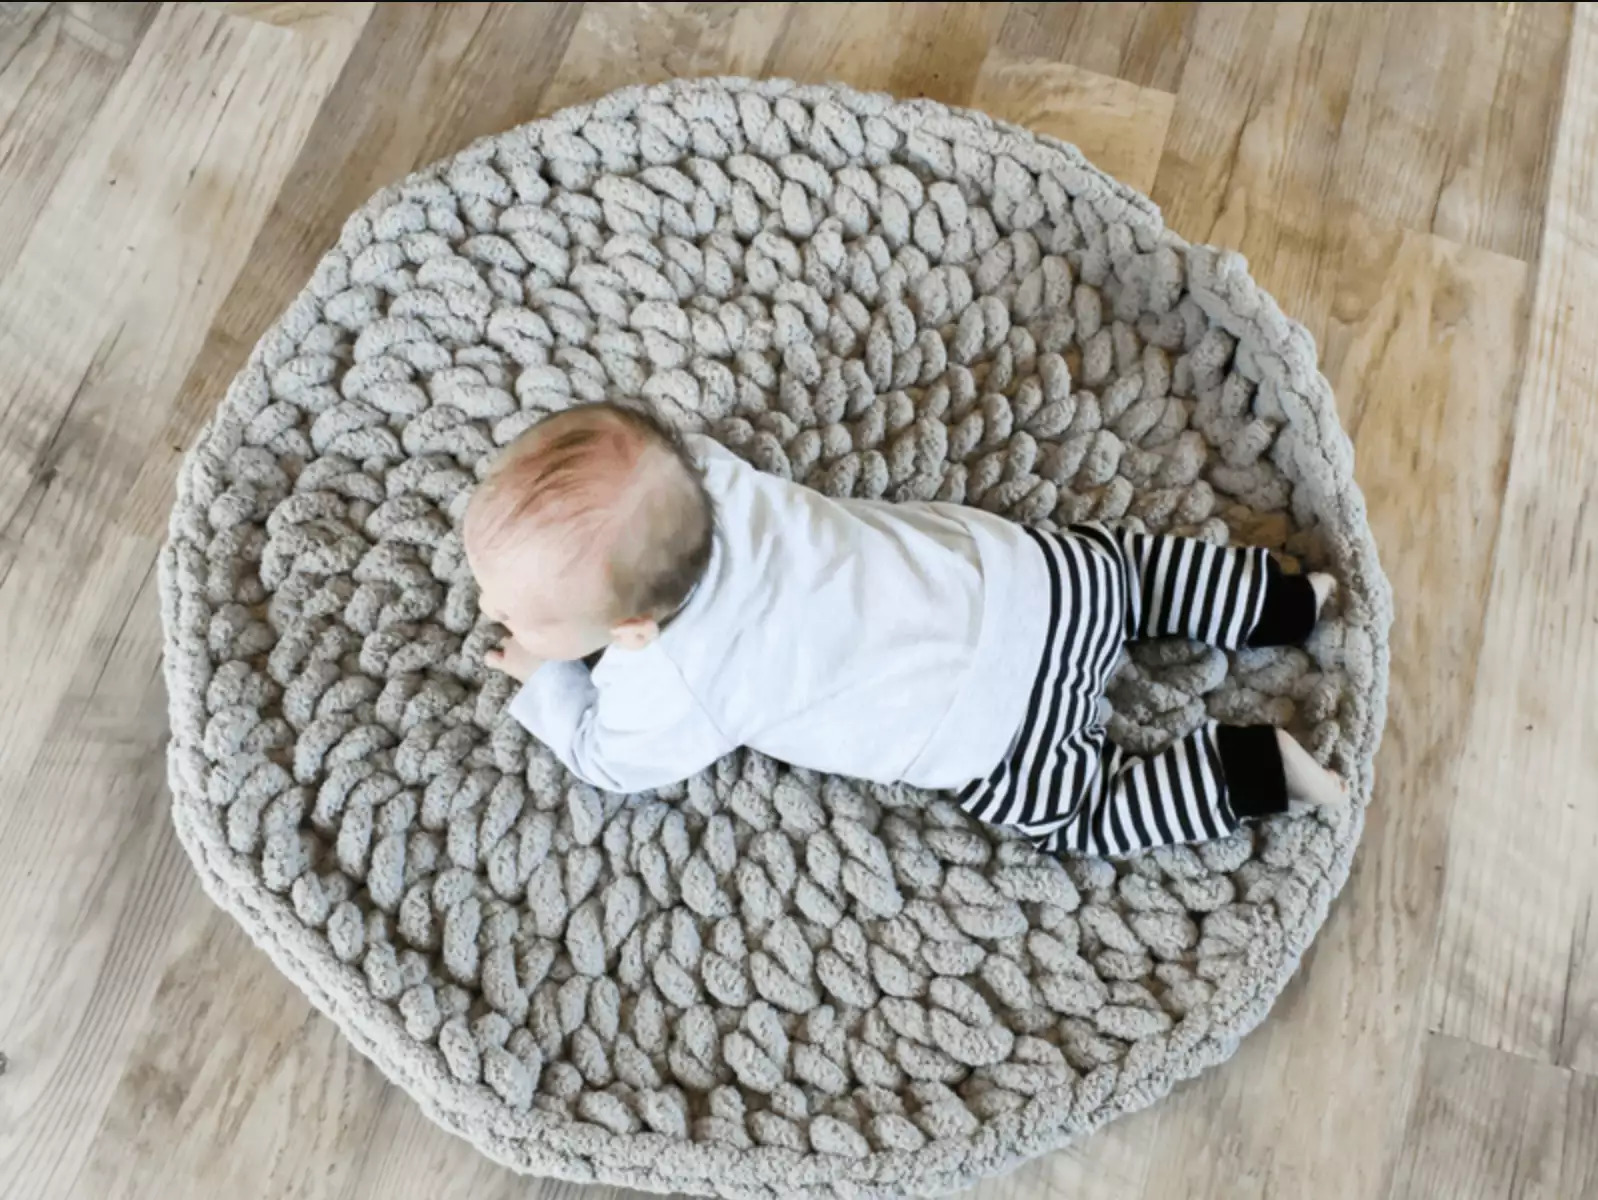 Give Baby a Crocheted Place to Play